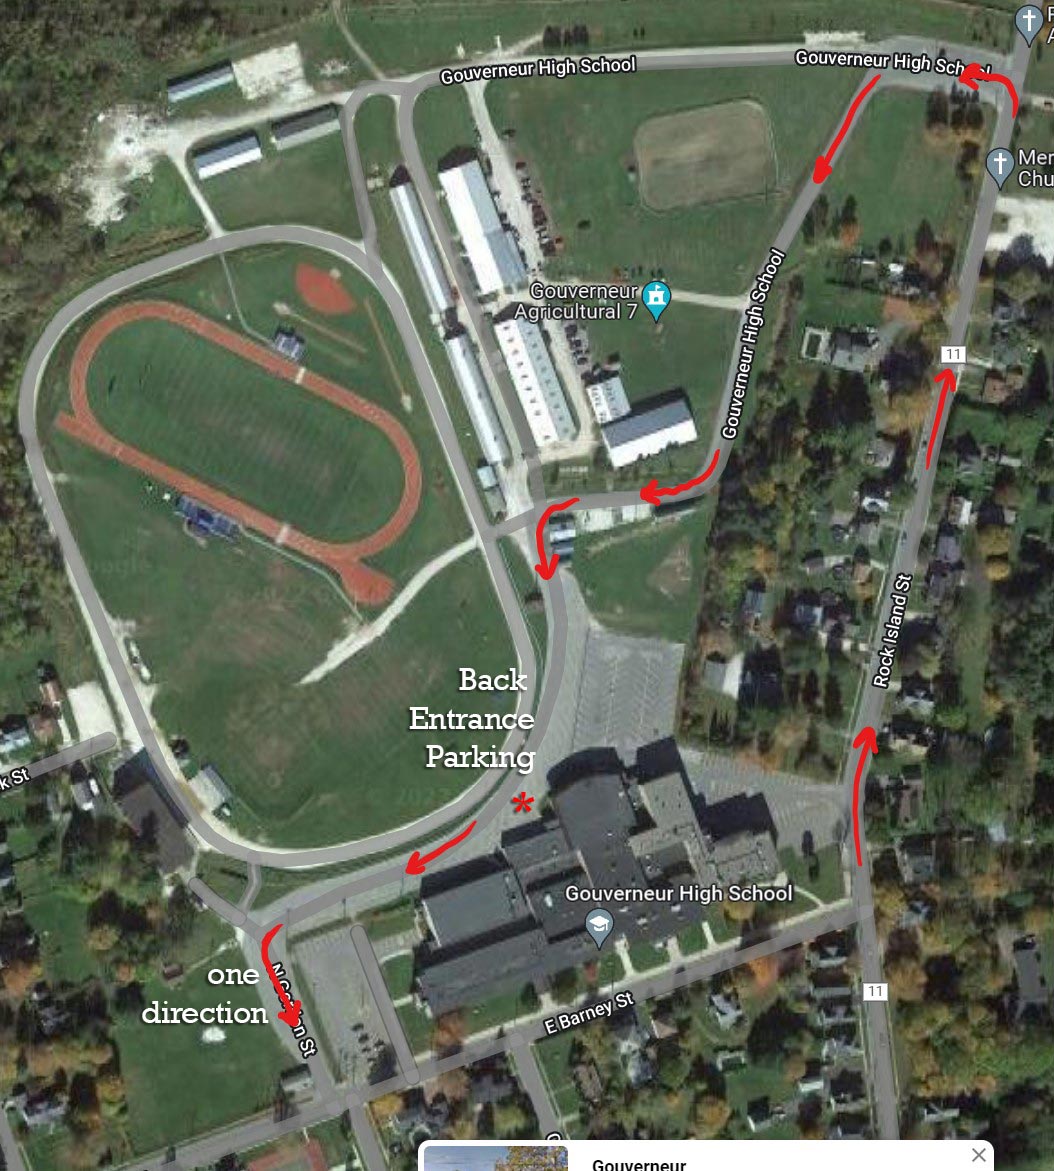 a google map of the high school showing the direction of traffic flow and where the back entrance parking is